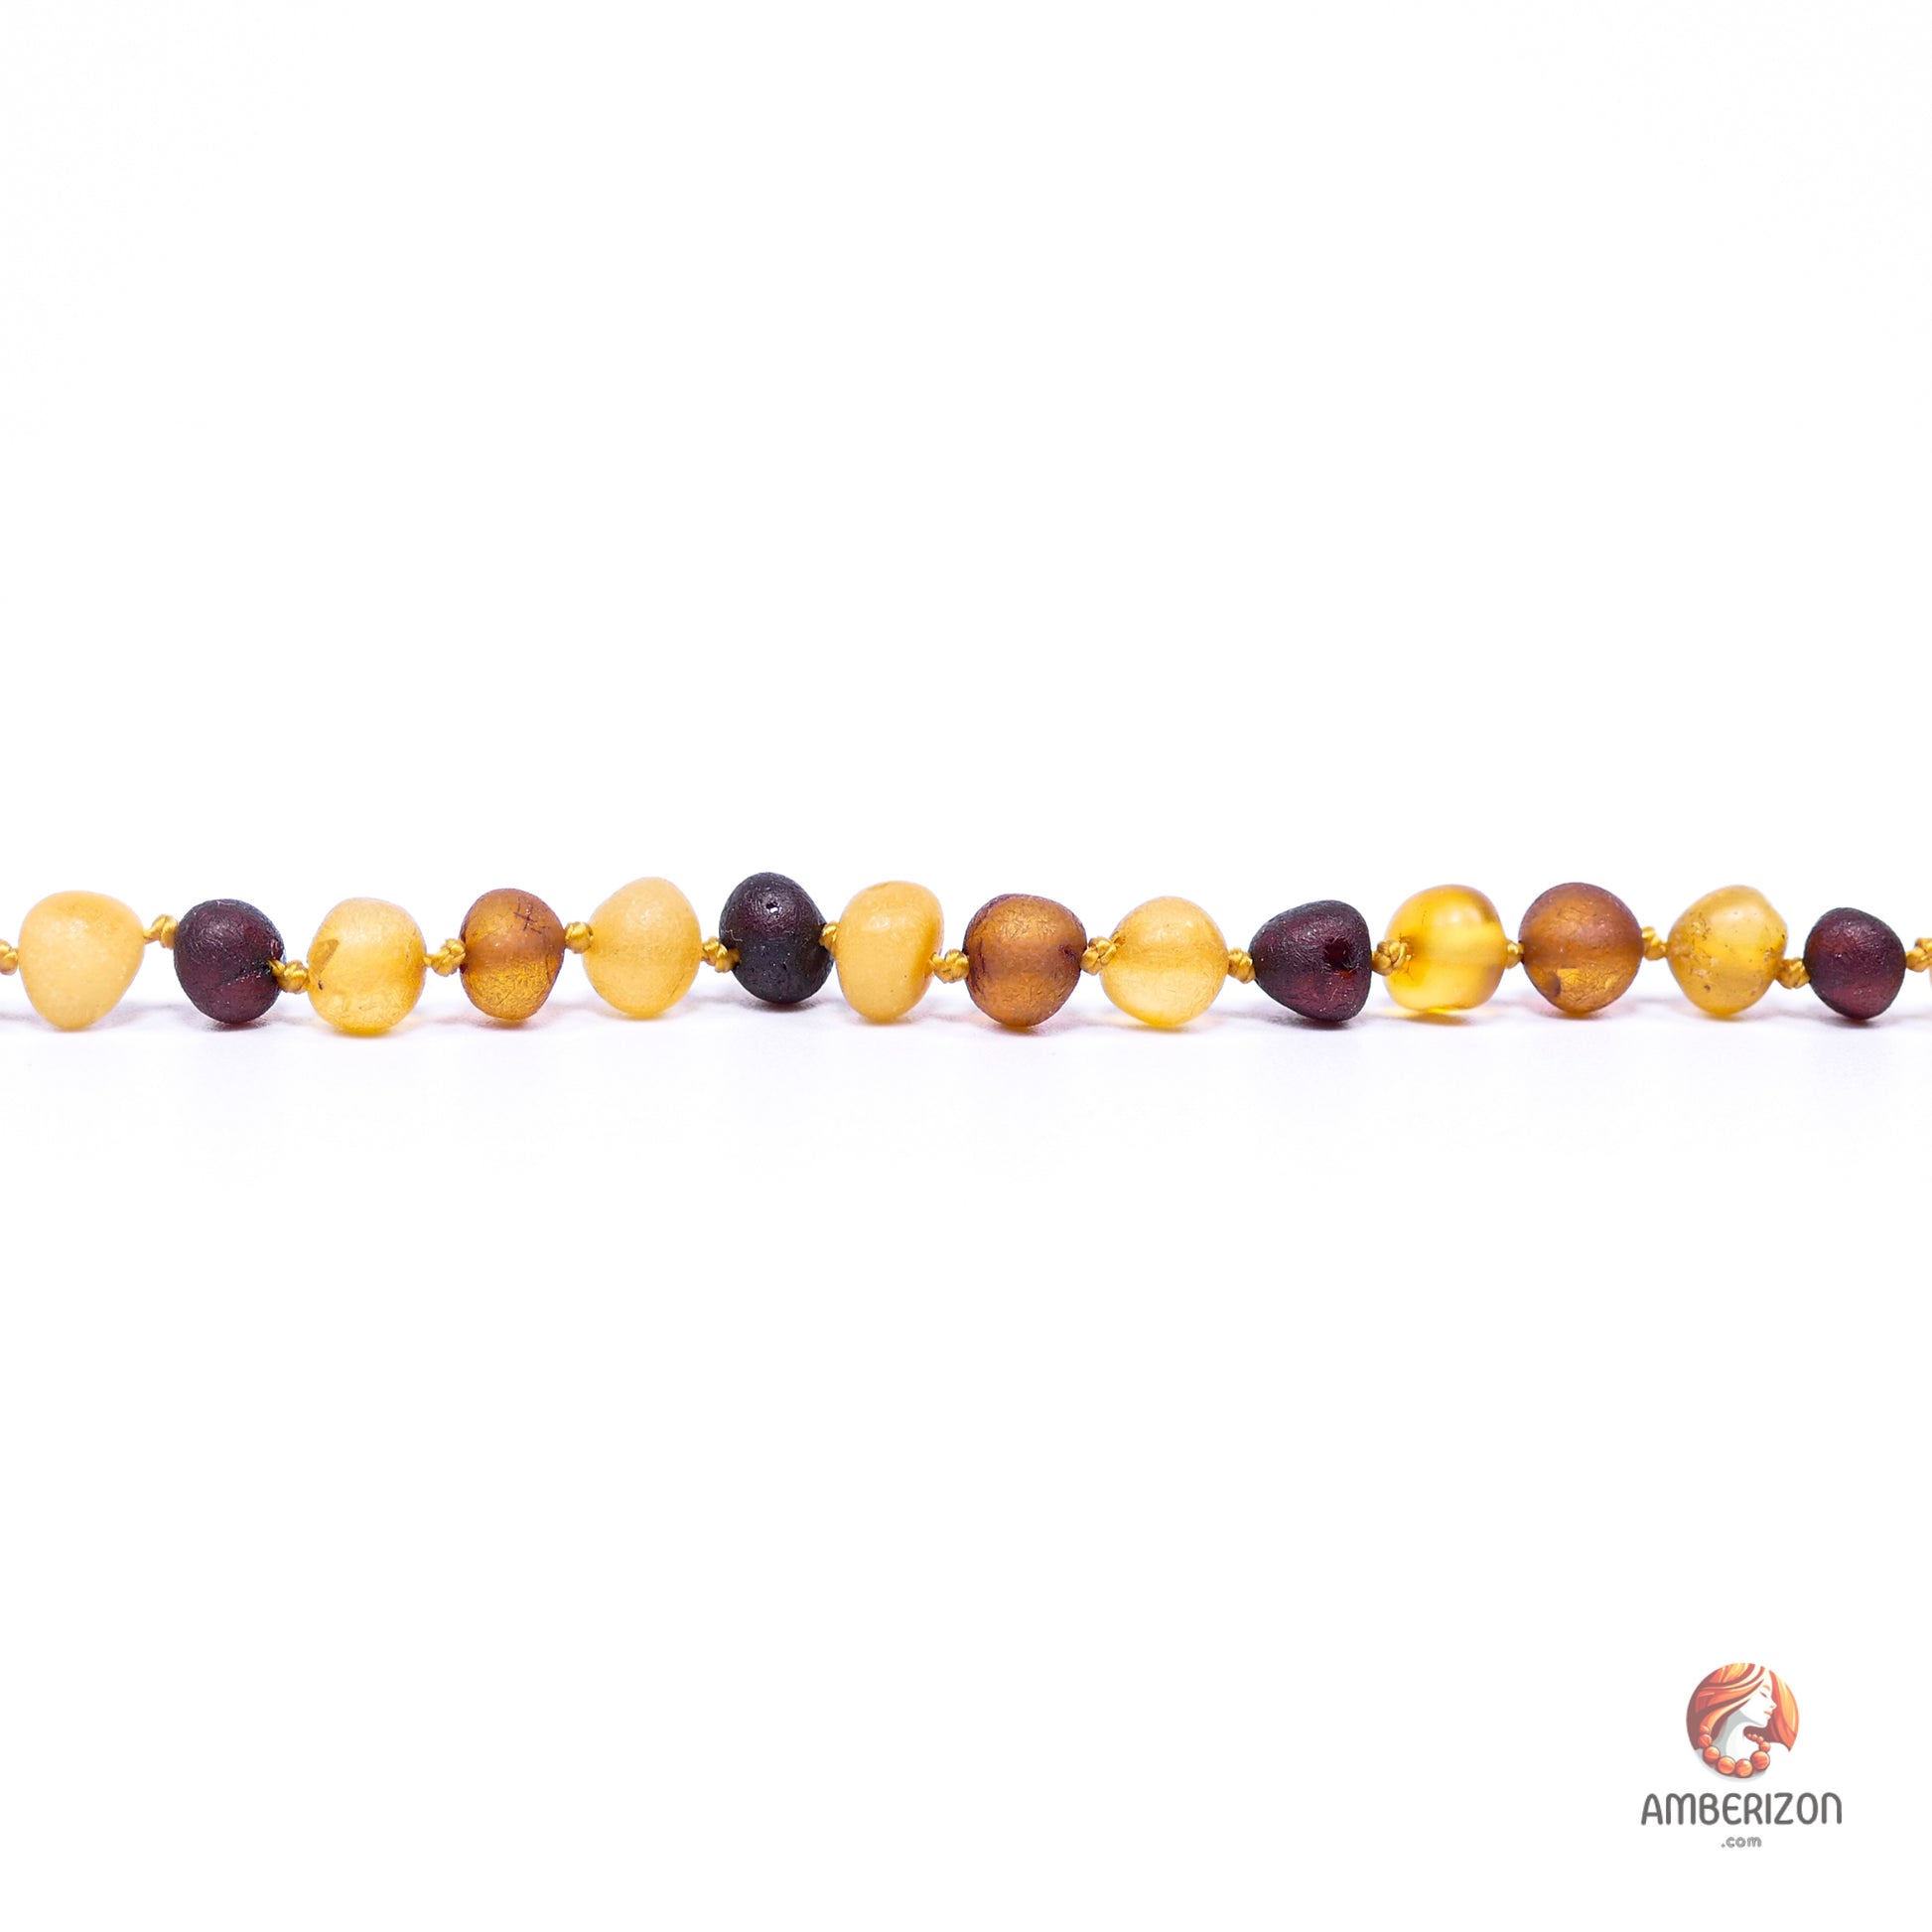 Baltic sea amber jewelry from Lithuania - Lithuanian amber necklace for adults 